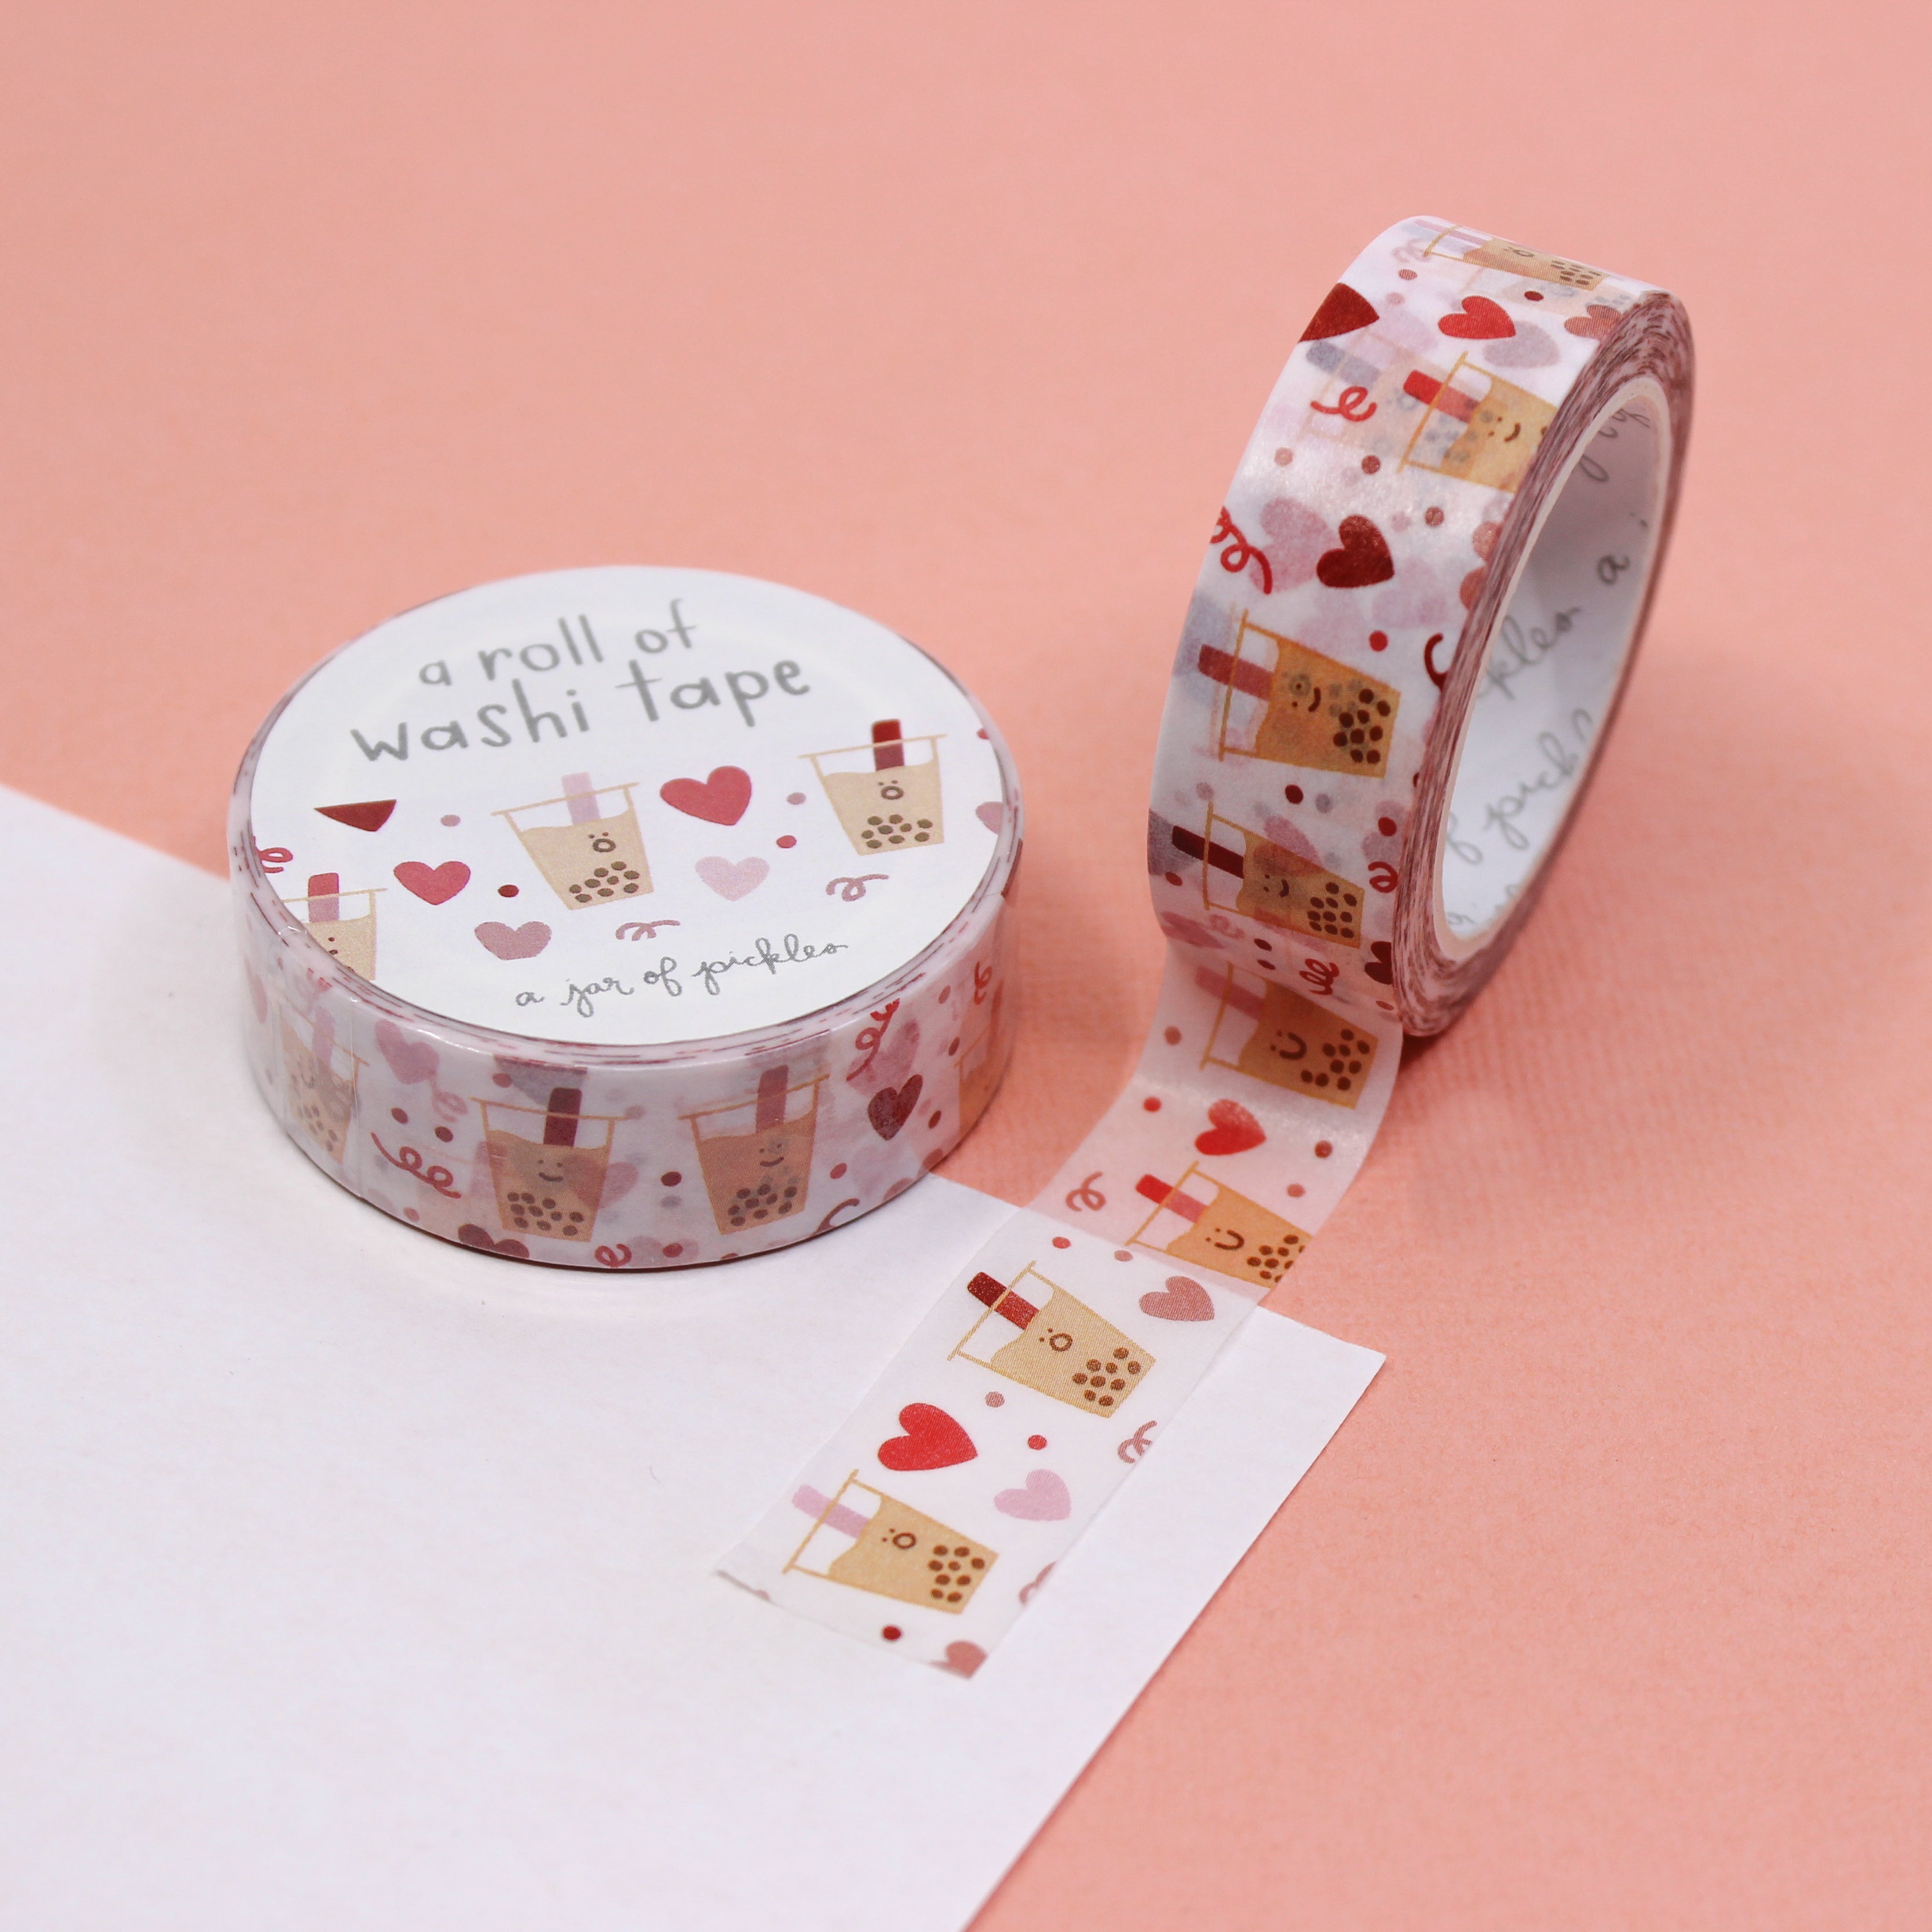 Boba Love Washi Tape captures the essence of a delightful dessert with its sweet and charming design. Featuring playful elements and vibrant colors, this tape is perfect for adding a touch of whimsy to your crafts and projects. This washi tape is from A Jar of Pickles and sold at BBB Supplies Craft Shop.